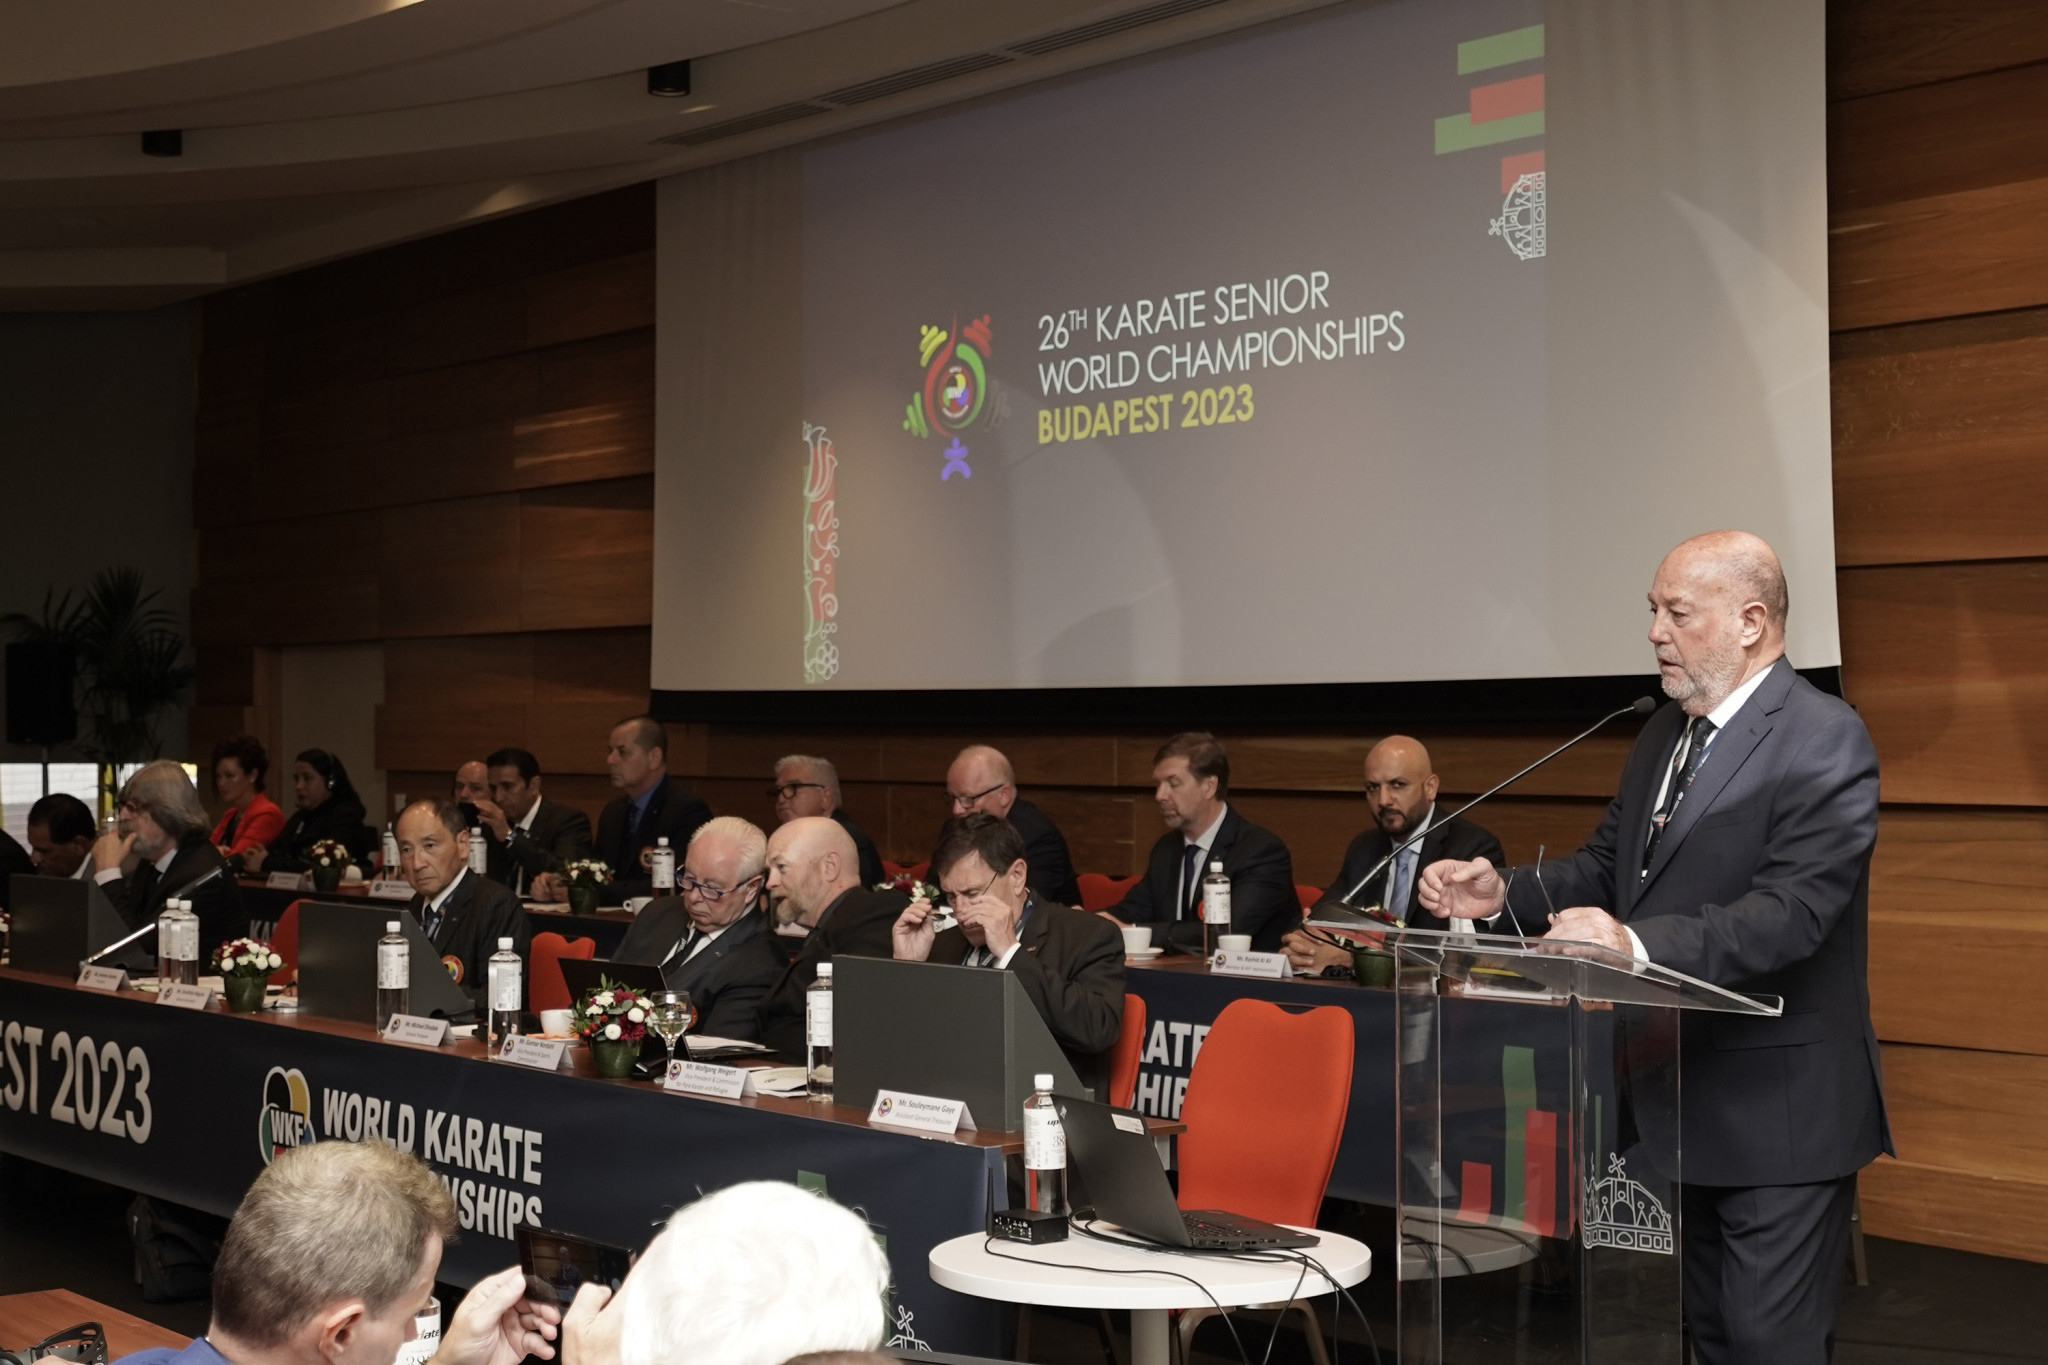 Karate officials look to future events at WKF Congress after latest Olympic snub